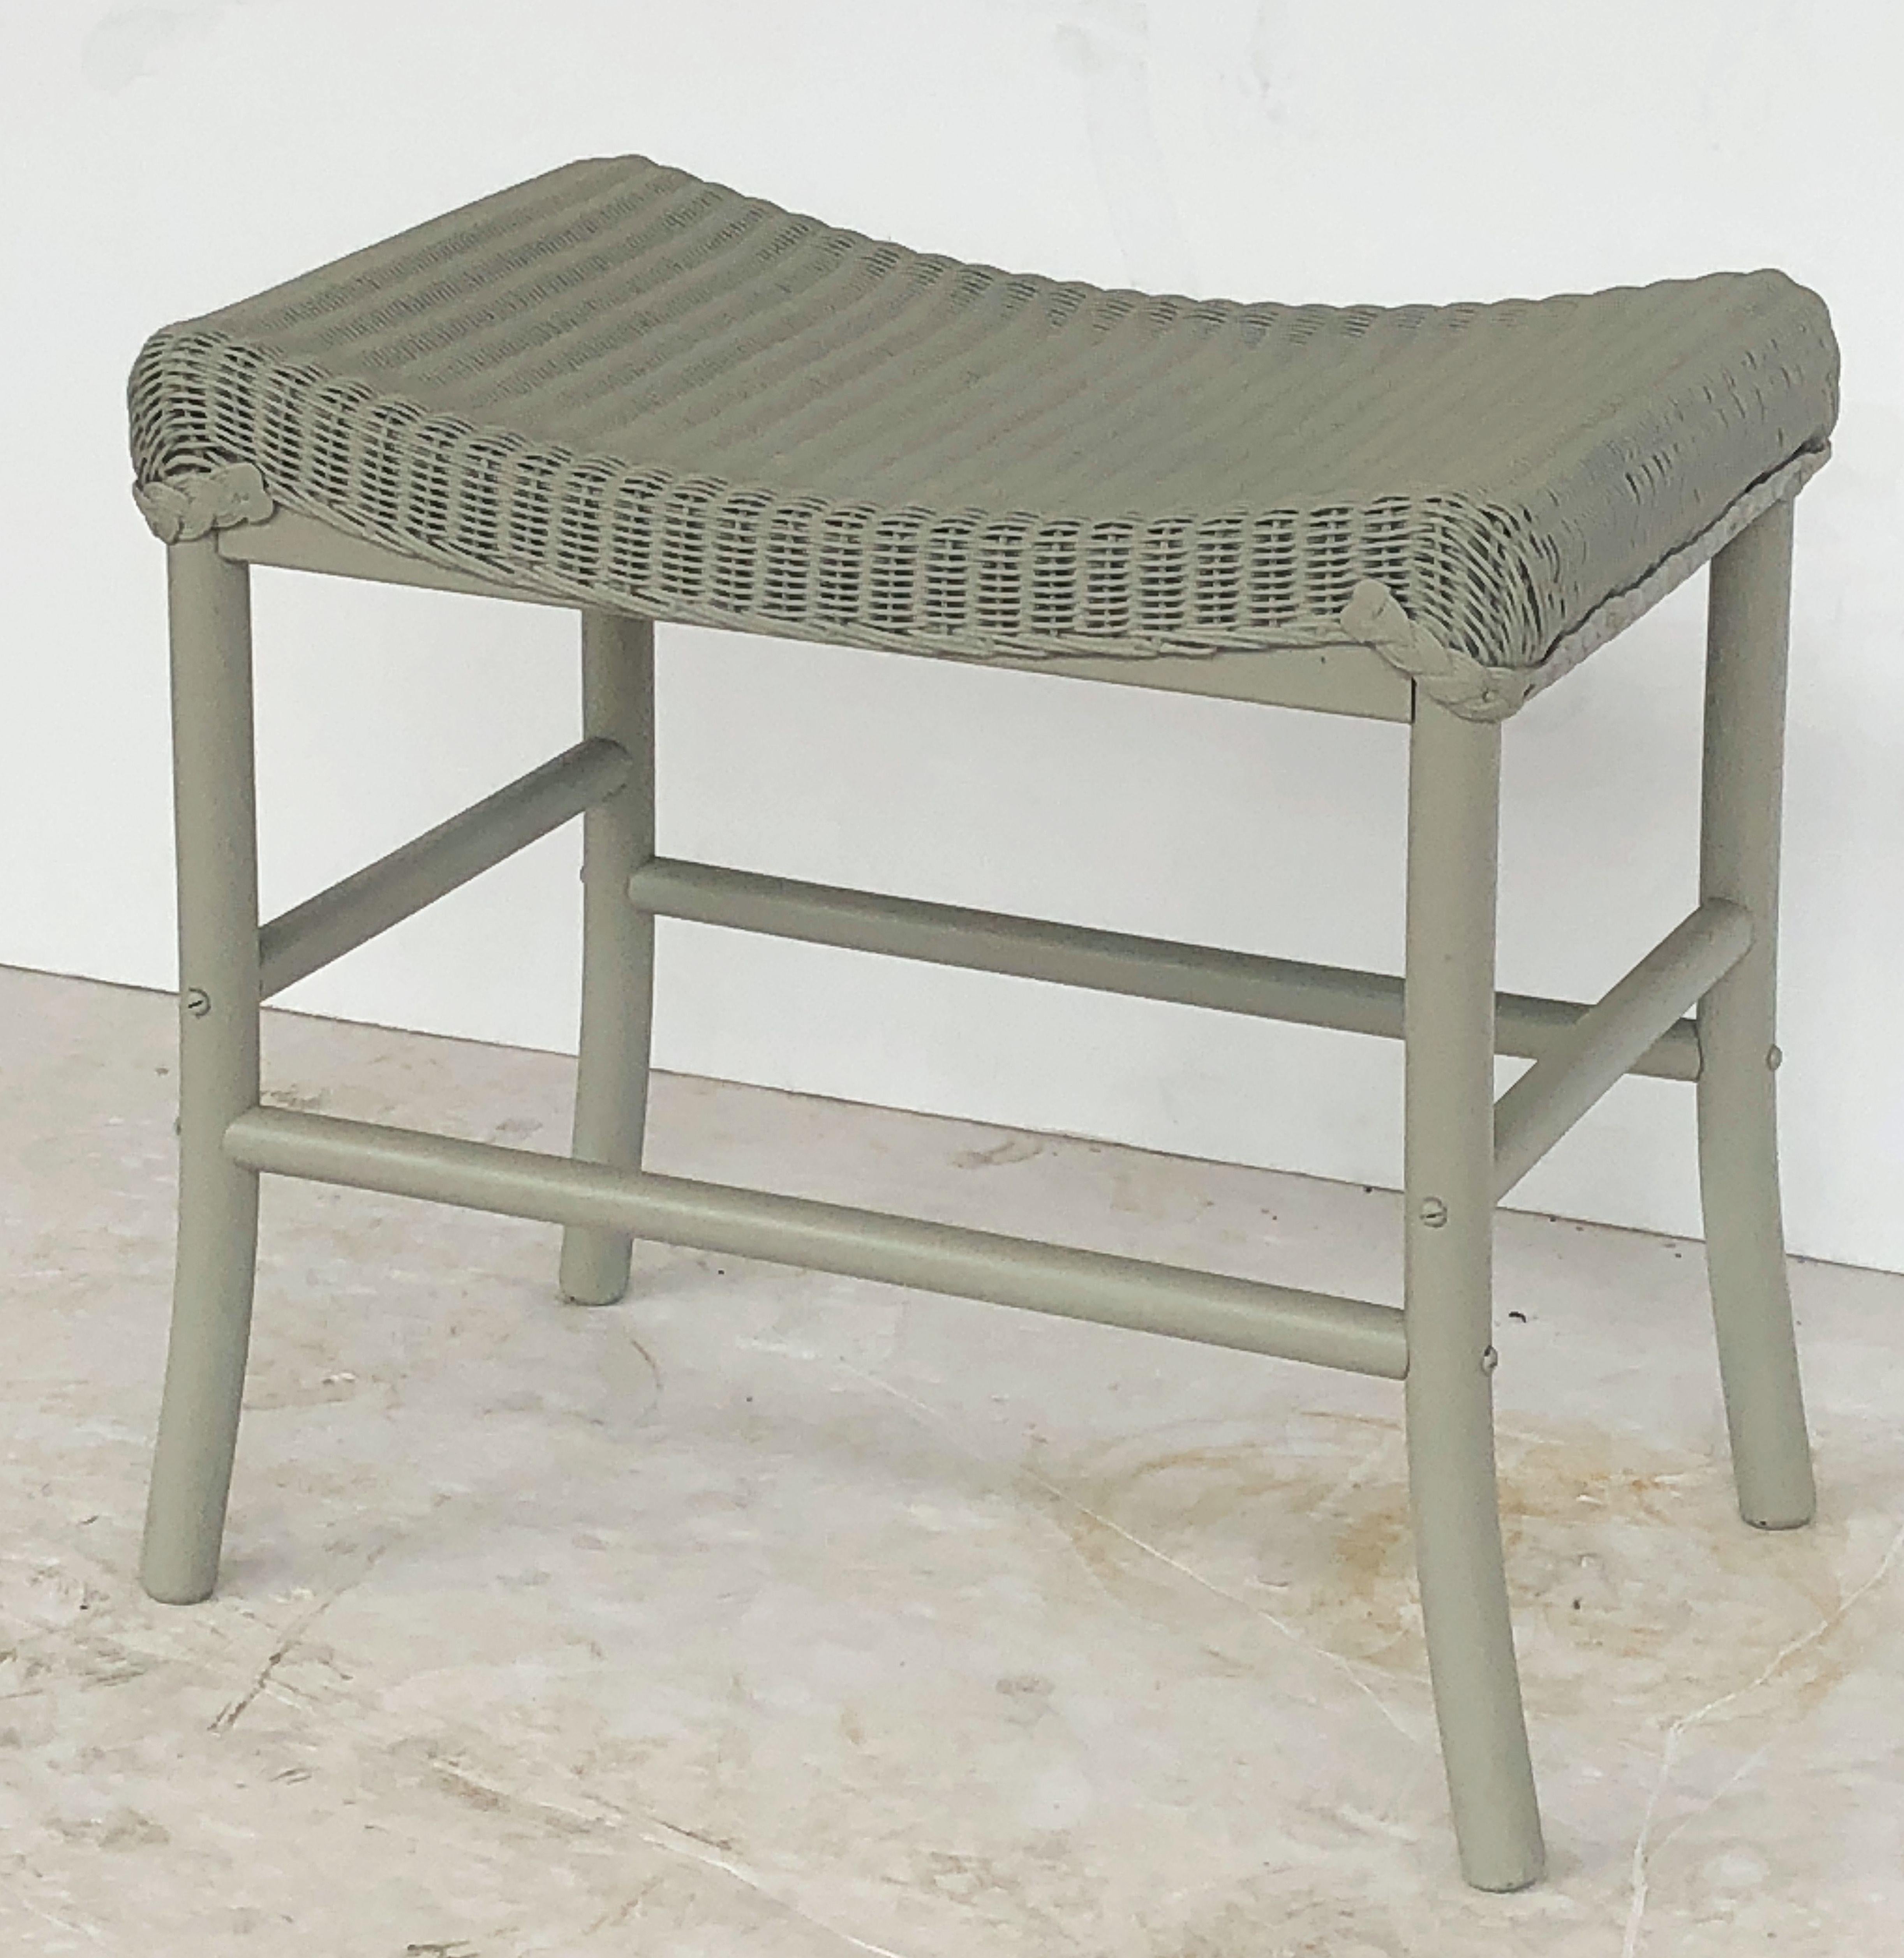 A fine Lloyd Loom stool or ottoman, synonymous with classic English style, featuring a rectangular seat of woven wicker and wire over a wood frame stretcher.

Perfect for an indoor or outdoor garden room, garden, or conservatory, this stool or